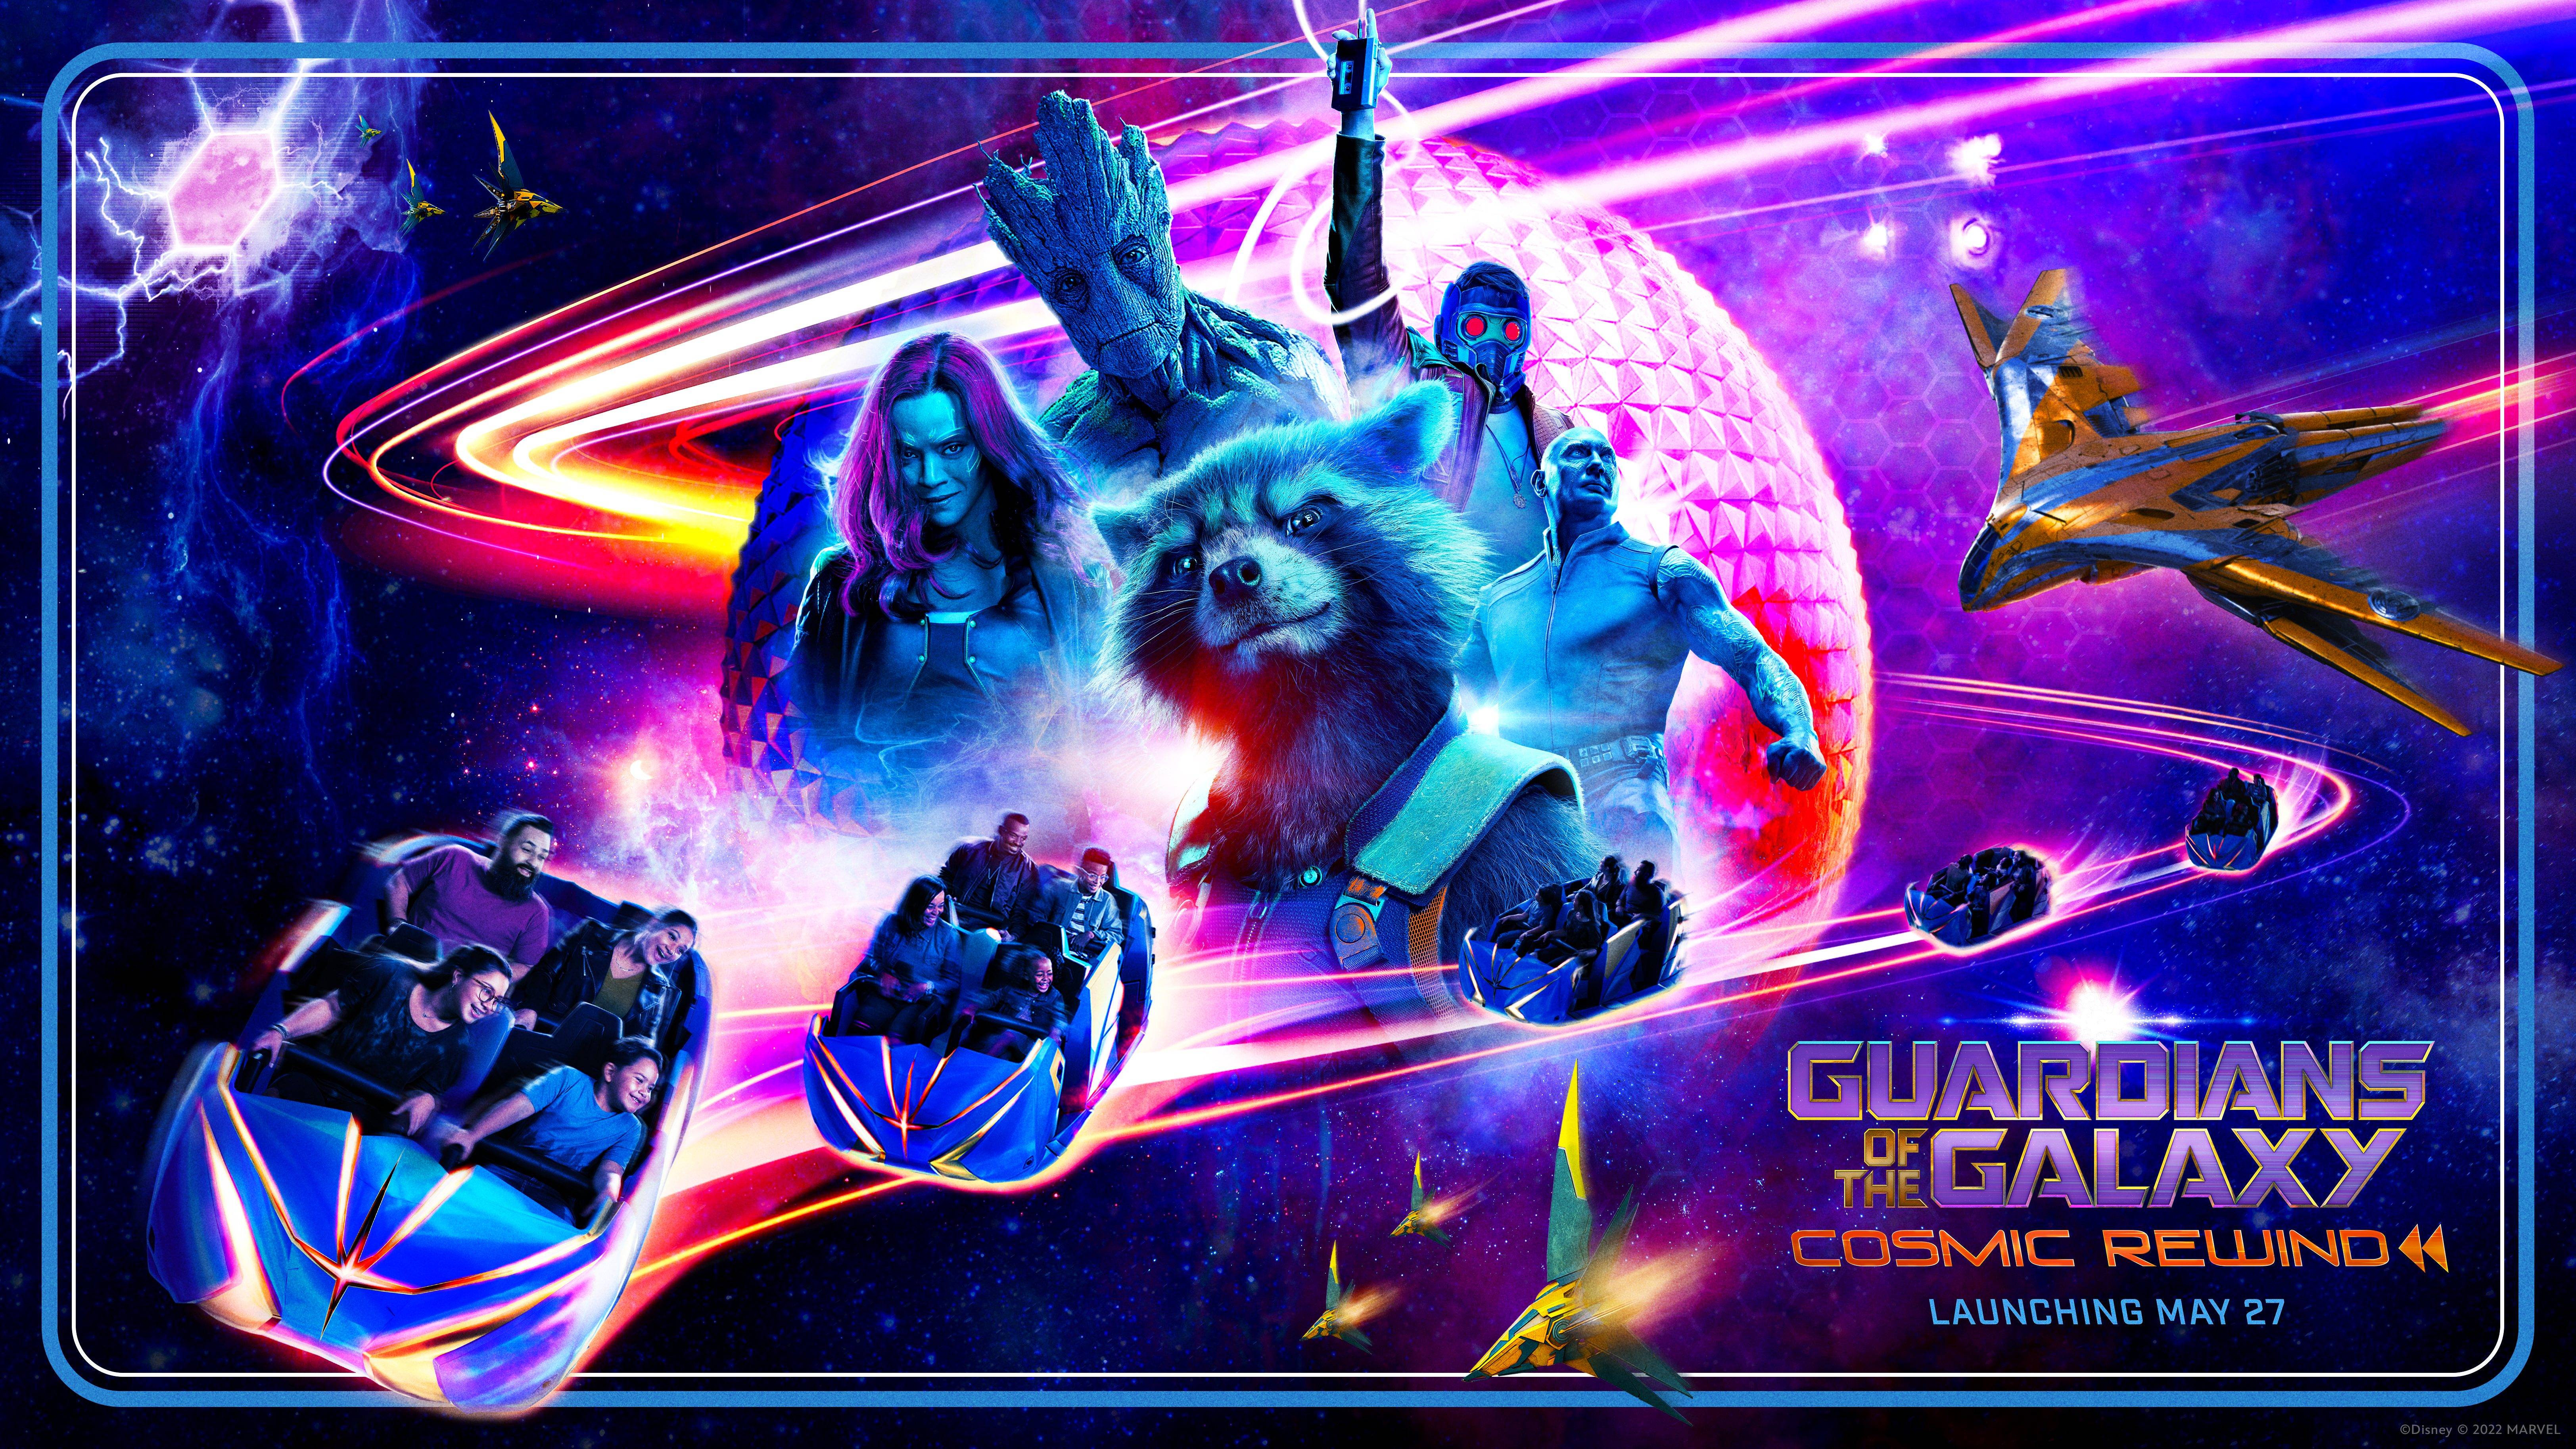 Guardians of the Galaxy Cosmic Rewind opening date website launch